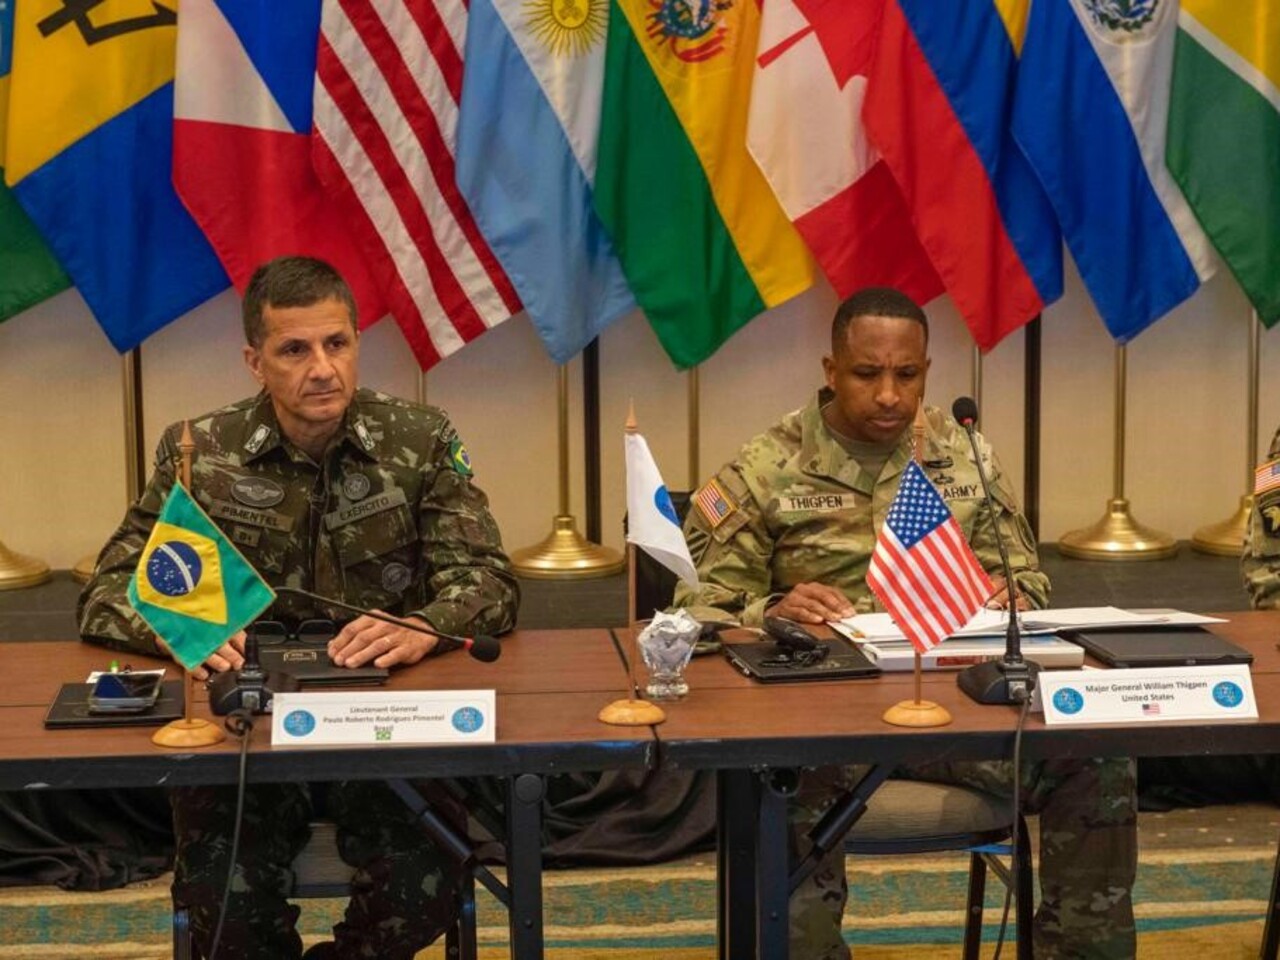 The Brazilian Army participates in a Specialized Conference of American Armies